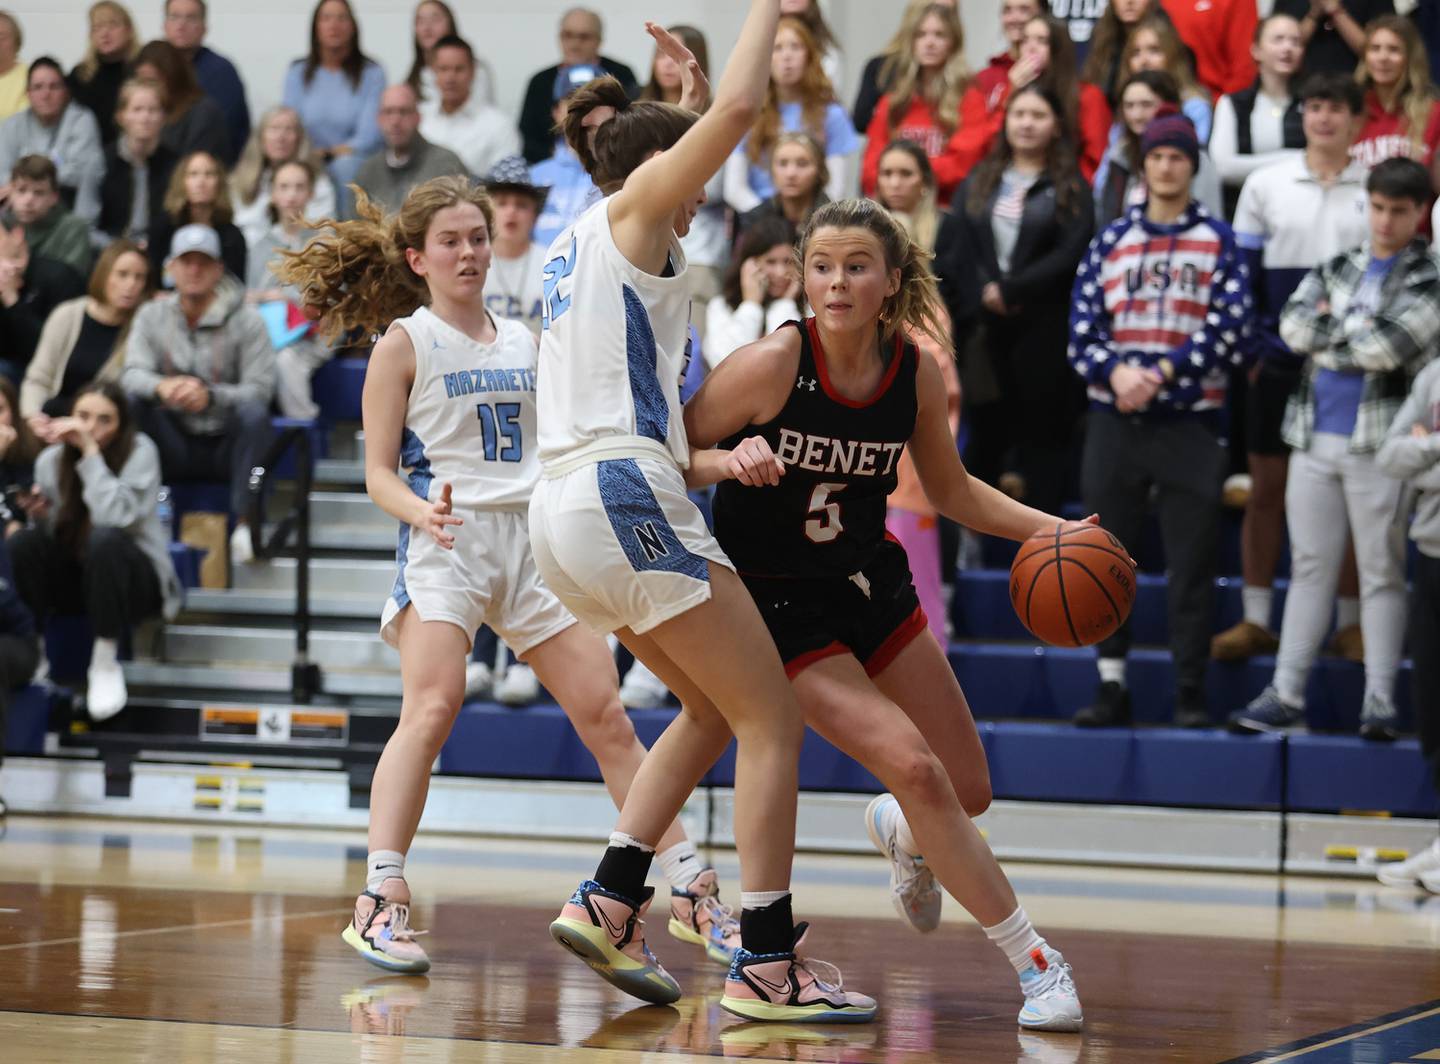 Benet's Lenee Beaumont (5) drives the baseline during the girls varsity basketball game between Benet and Nazareth academies on Wednesday, Jan. 3, 2023 in La Grange Park, IL.